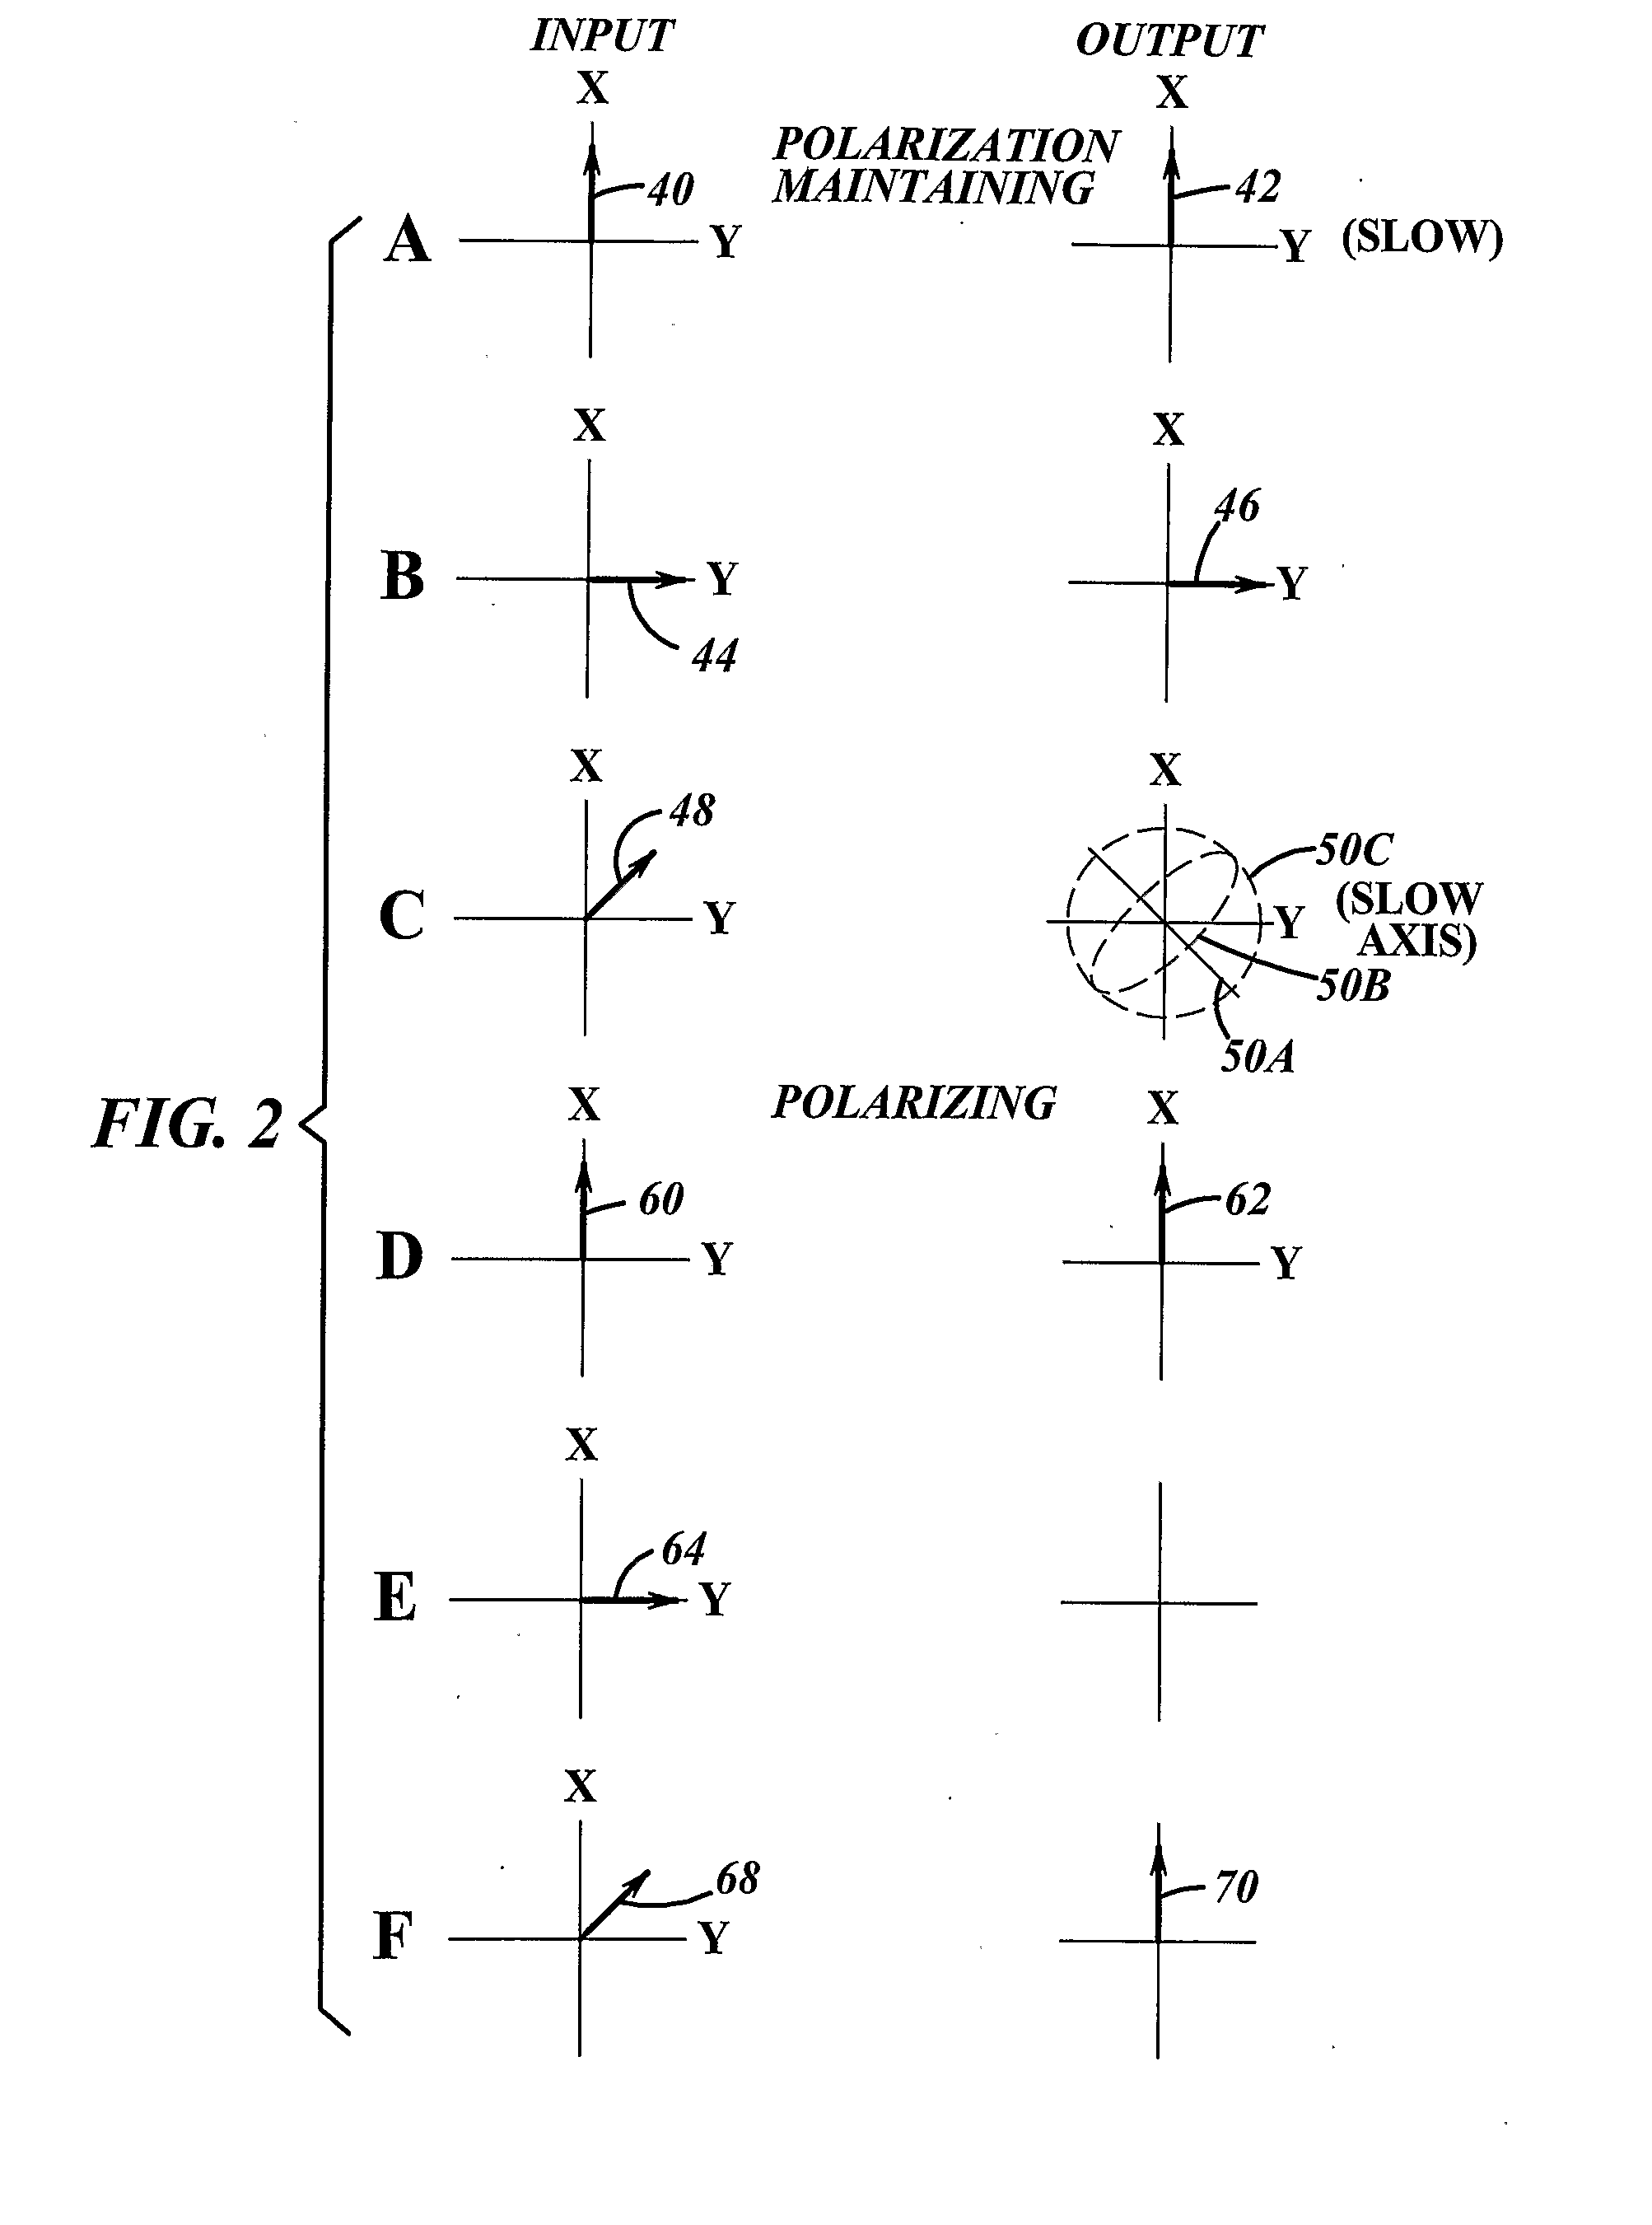 Method and Apparatus for Providing Light Having a Selected Polarization With an Optical Fiber